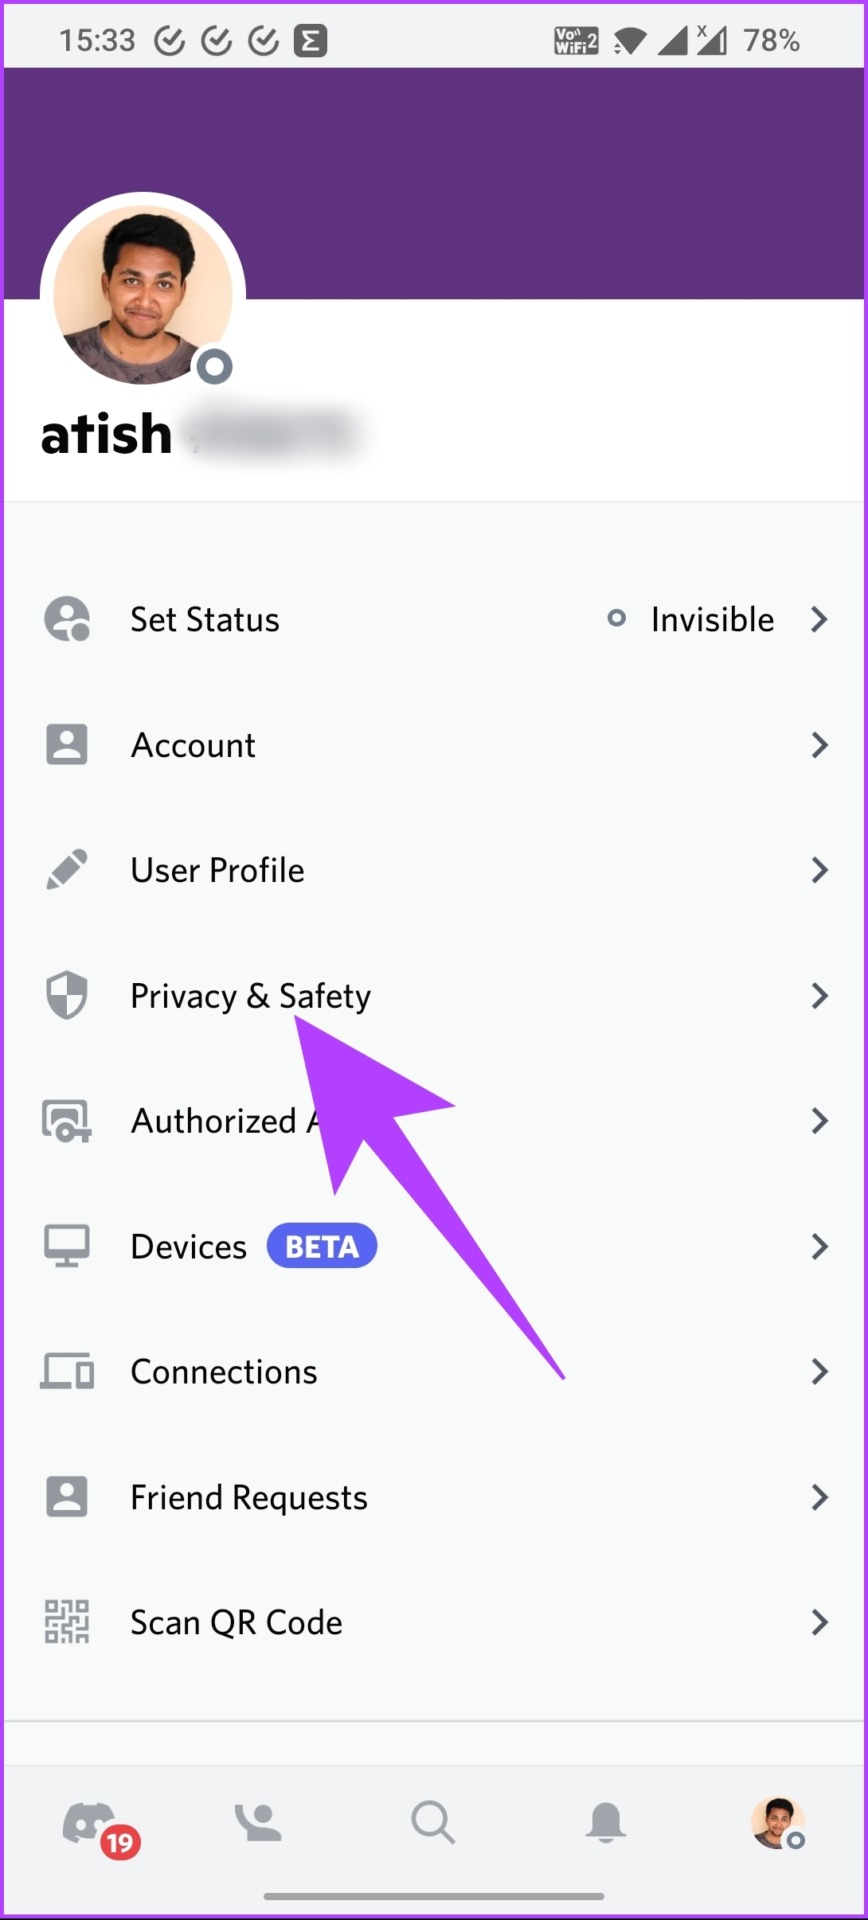 Click on the “Privacy and Security” option.